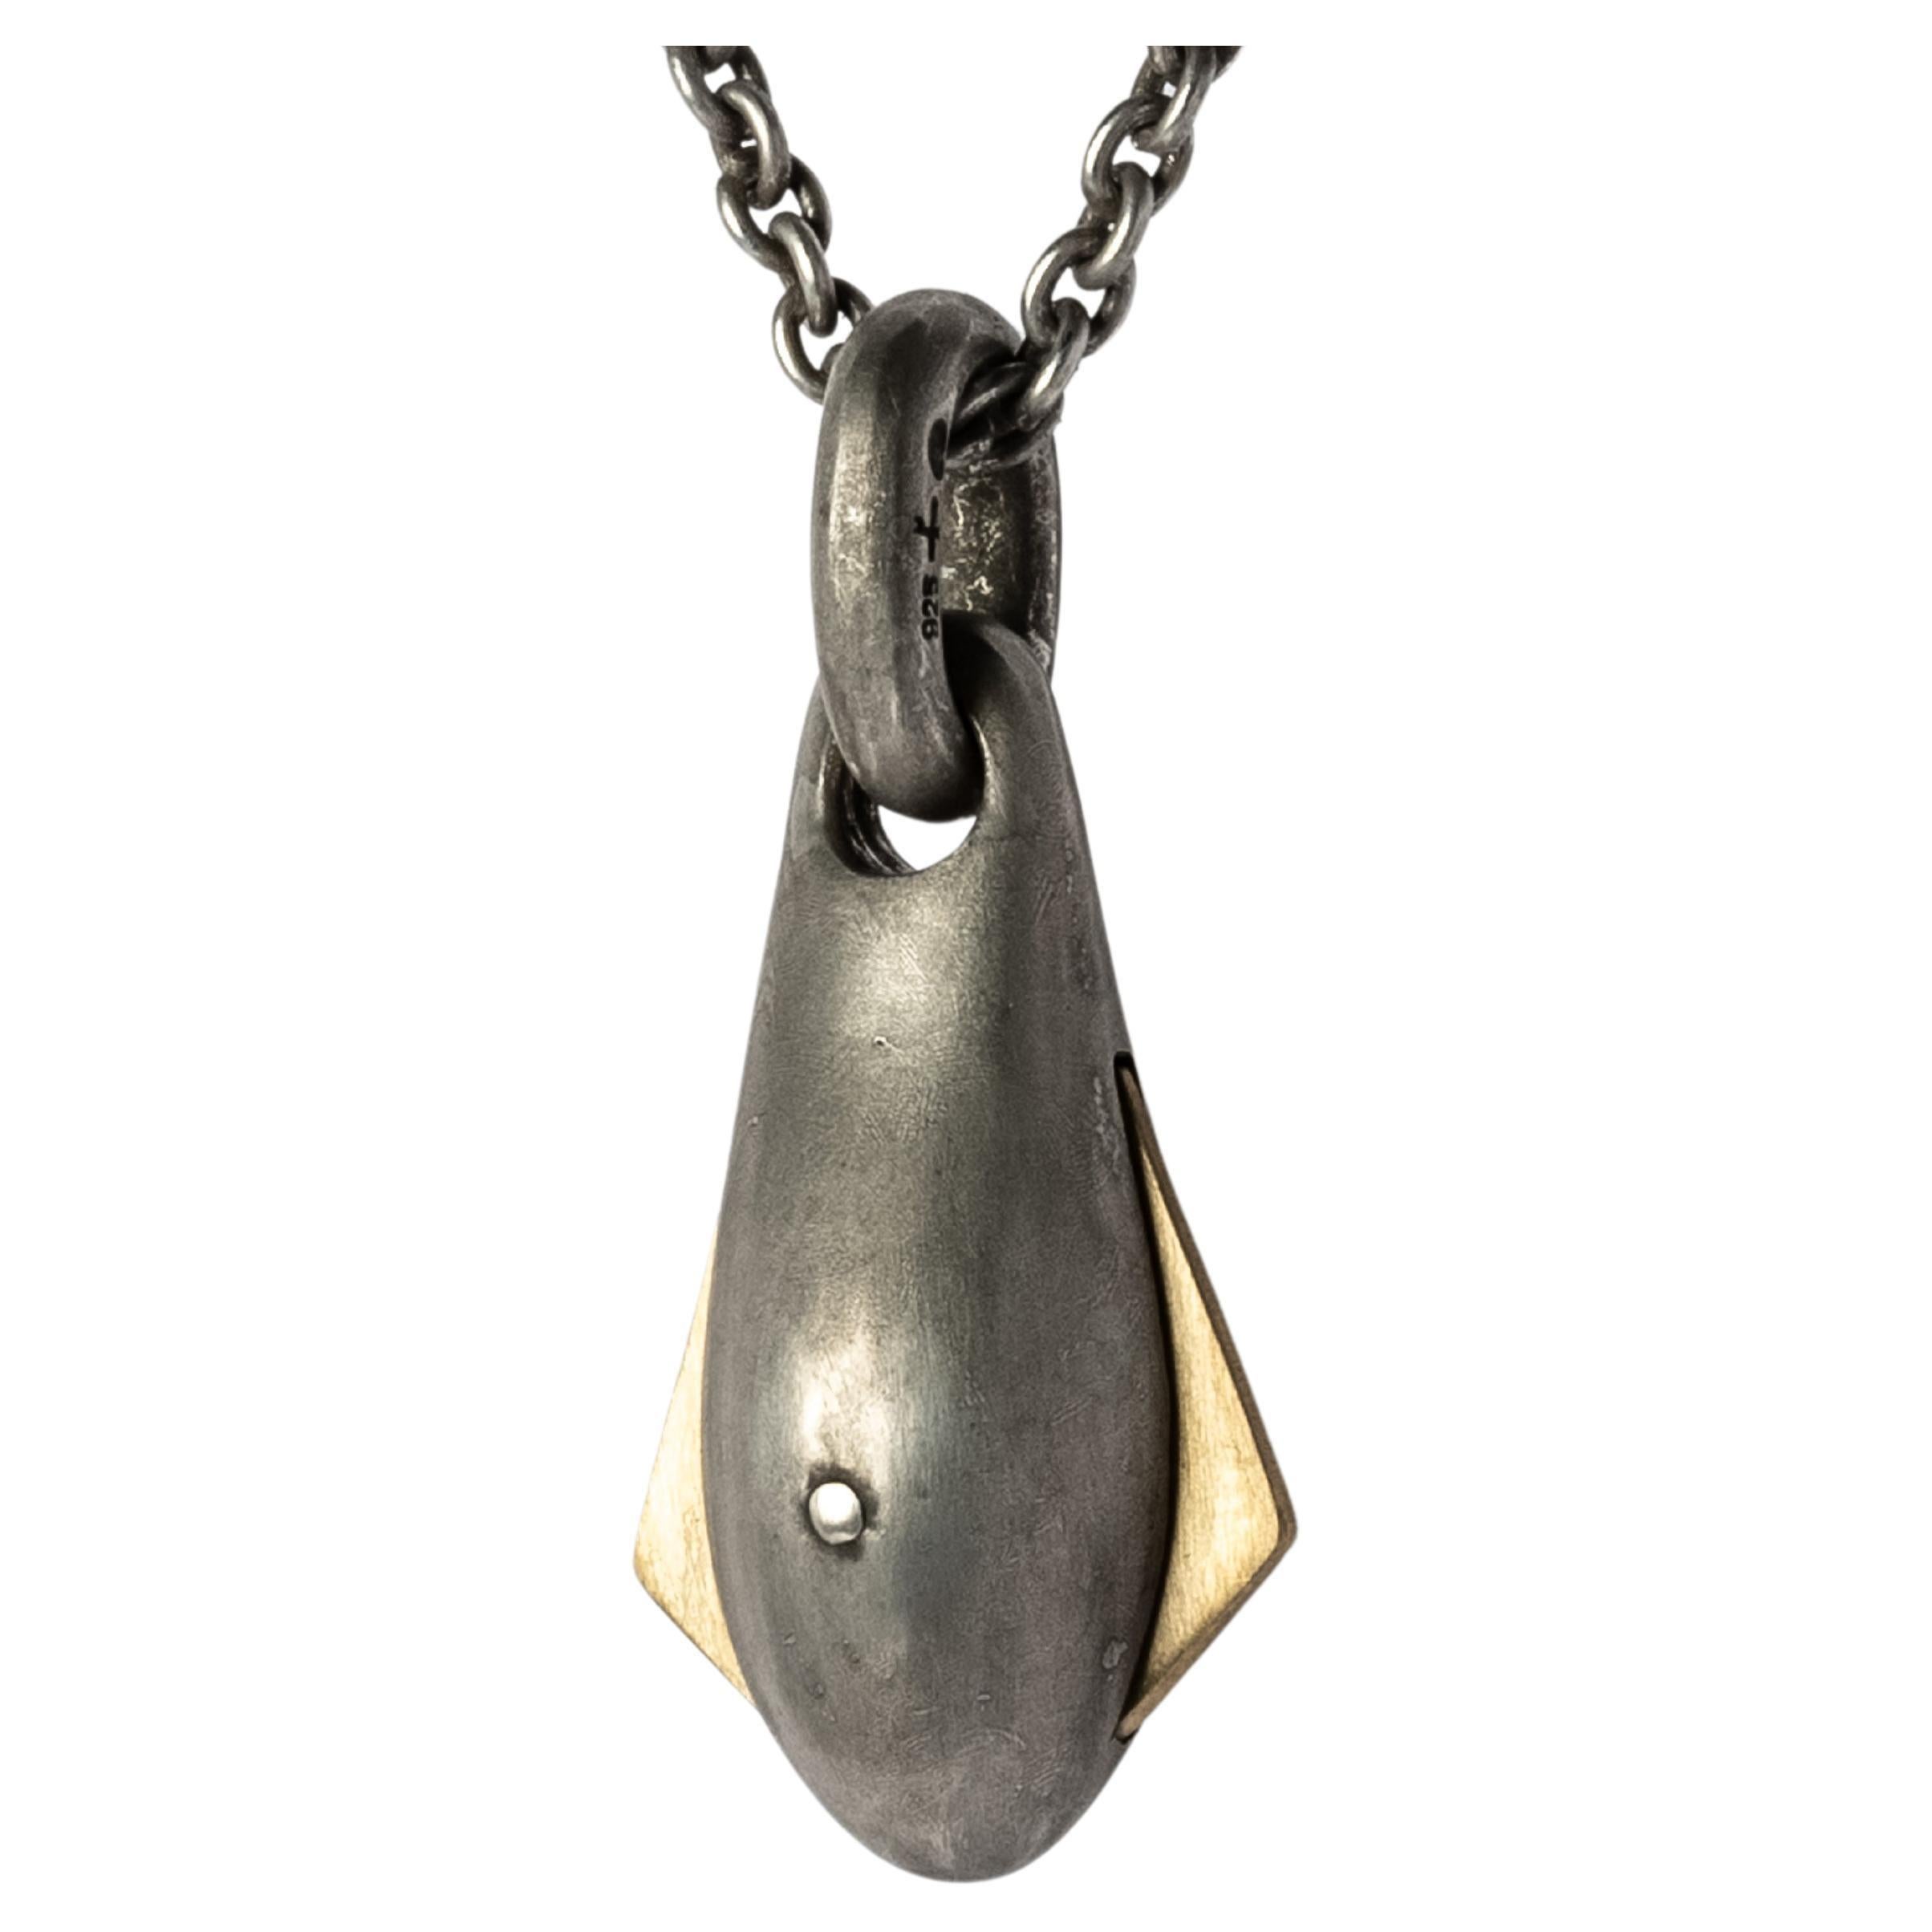 Drop necklace in the shape of chrysalis in combination of sterling silver and brass, it comes on a 74cm sterling silver chain.